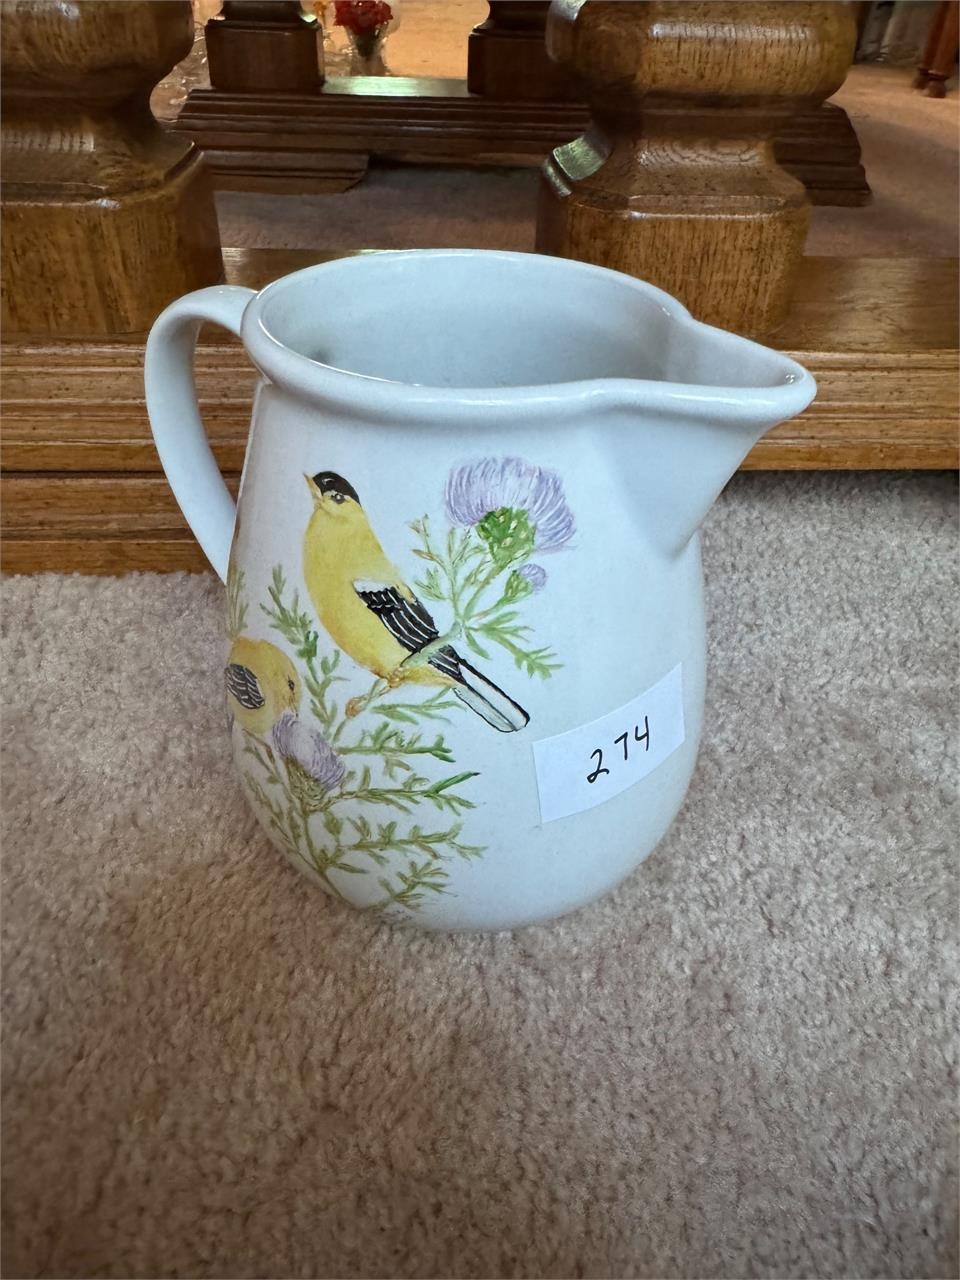 CERAMIC HANDPAINTED PITCHER WITH BIRDS 7" TALL